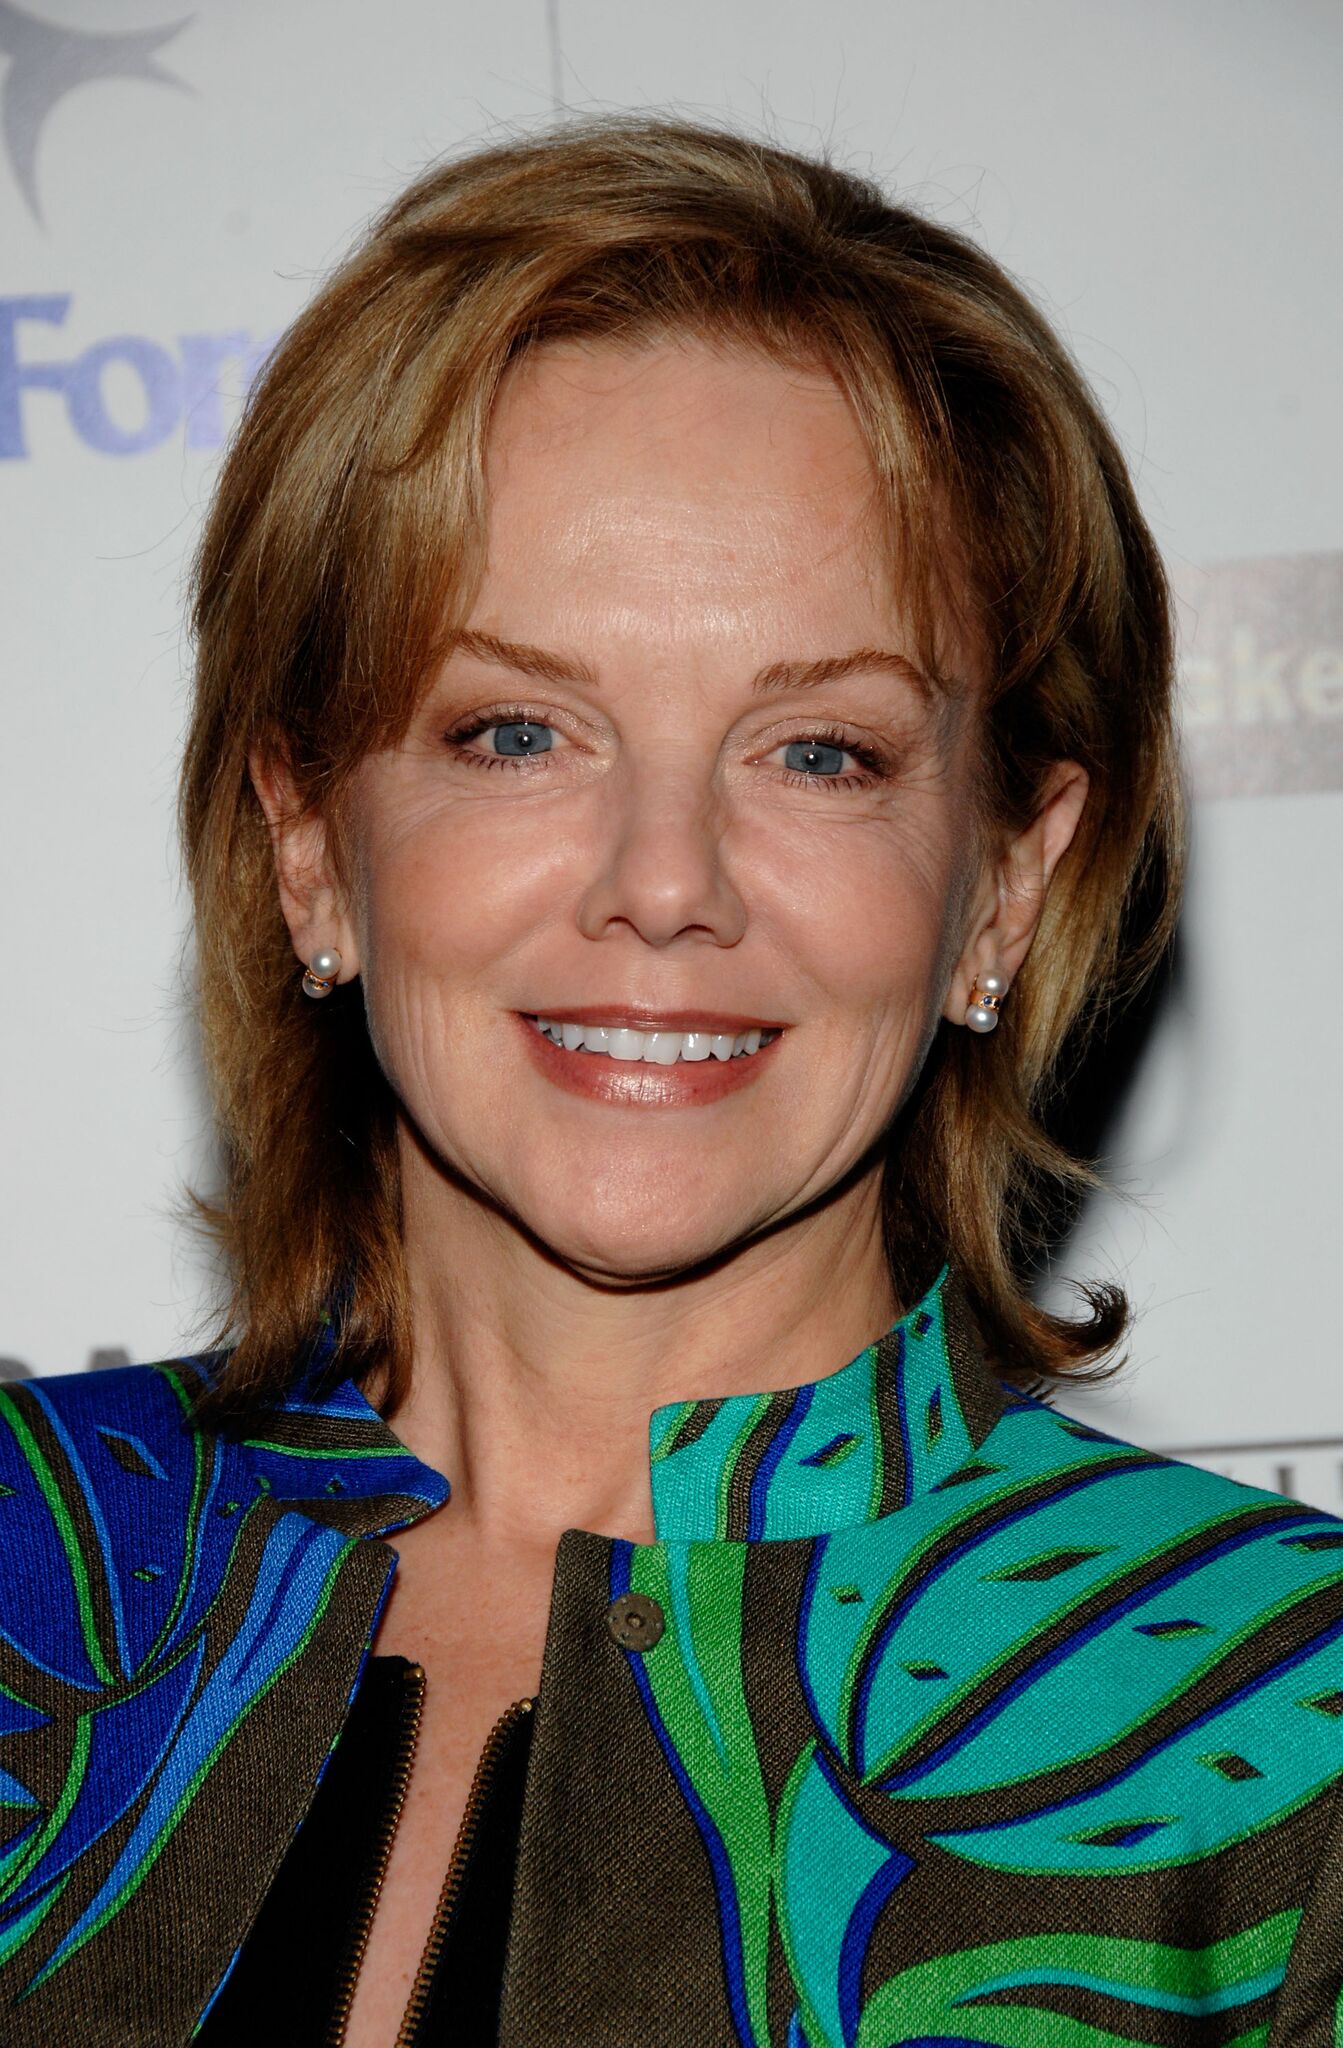 Linda Purl attends the Second Annual Douglas Blasdell Outreach Program Celebration at Bardot | Getty Images